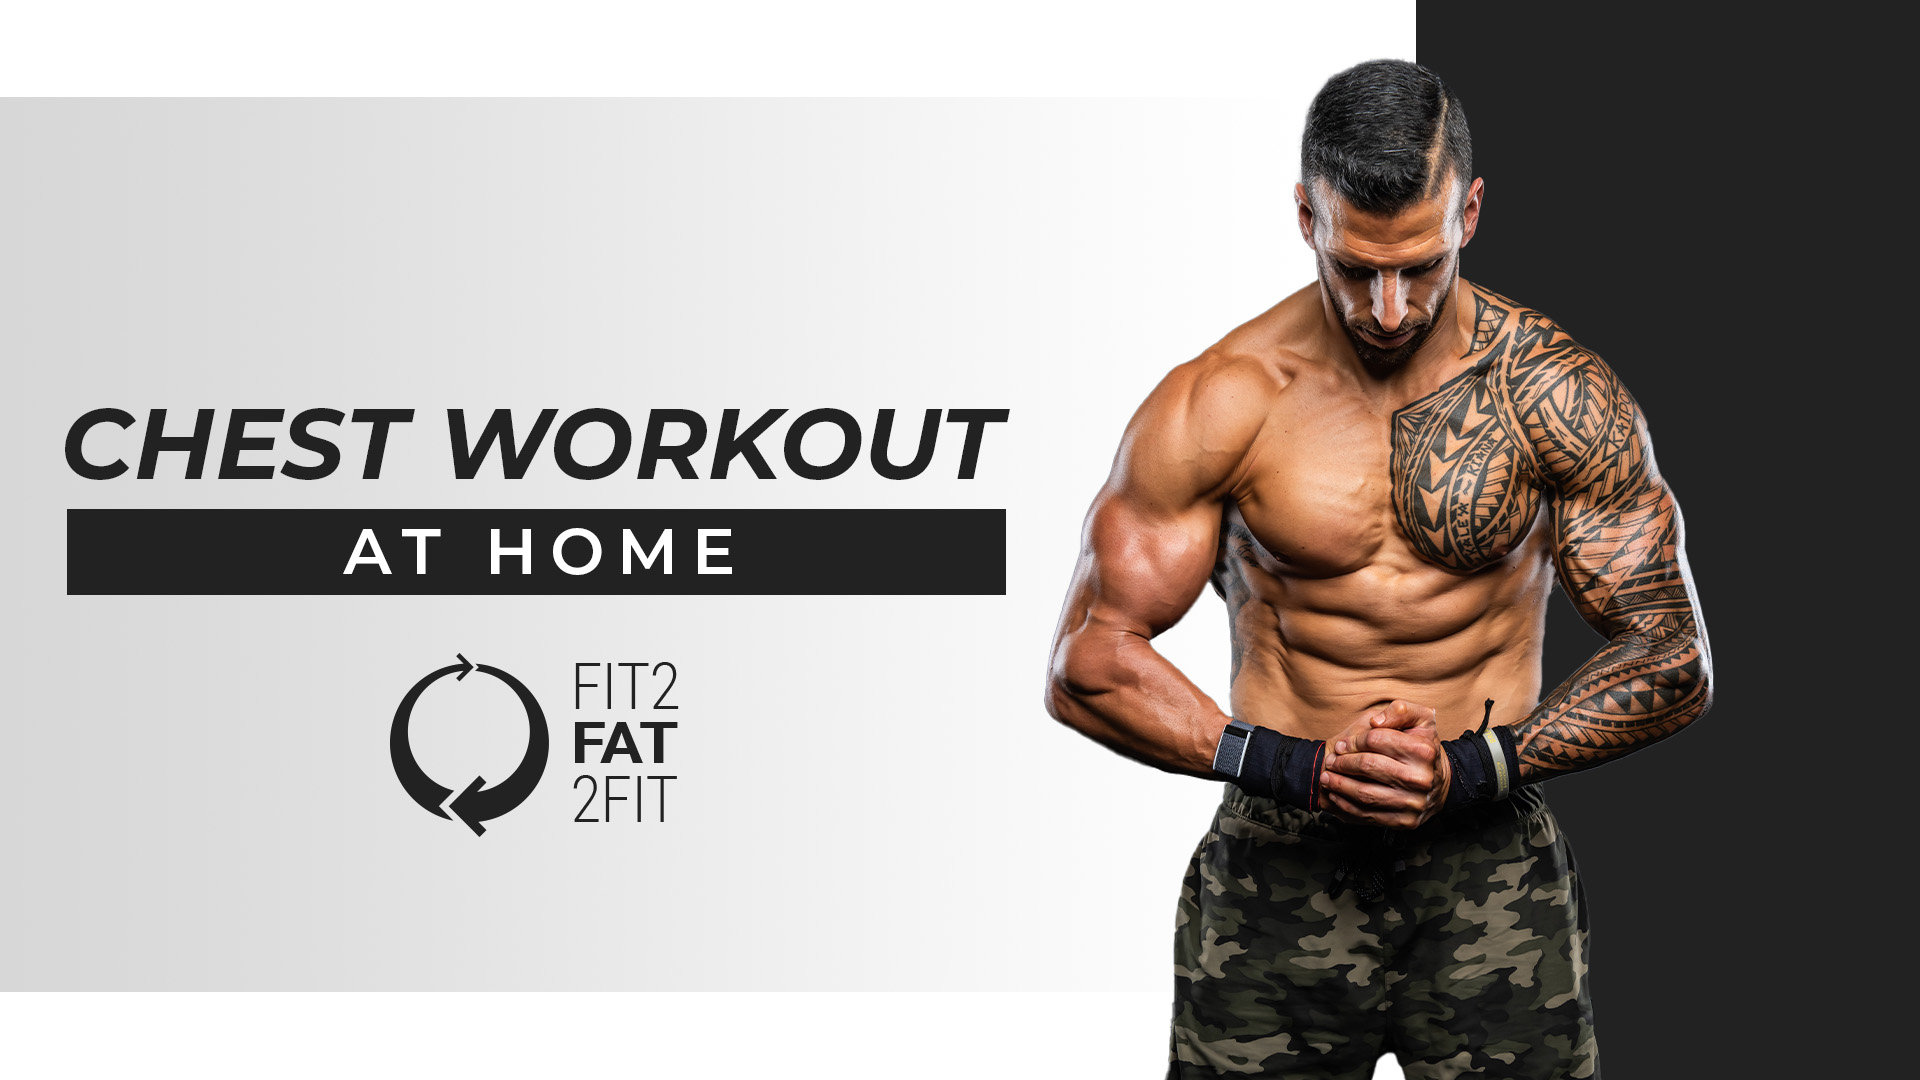 Try this At Home Chest Workout - Fit2Fat2Fit